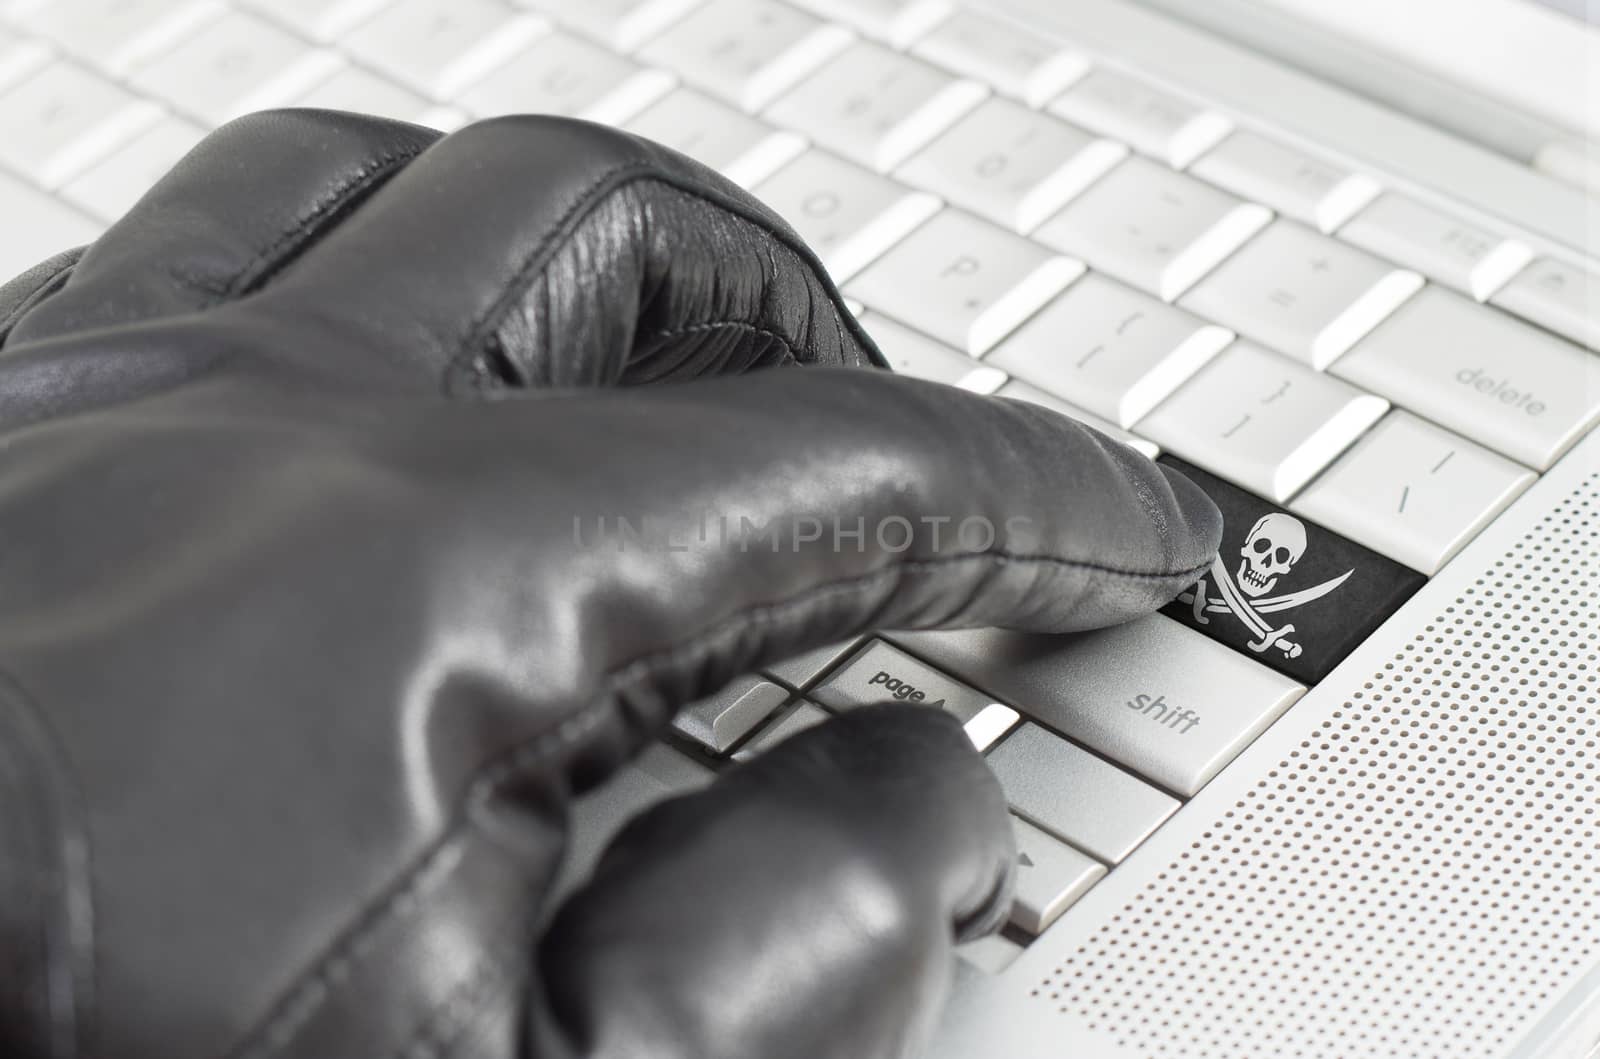 Hacking concept with hand wearing black leather glove pressing enter key with flag overlaid